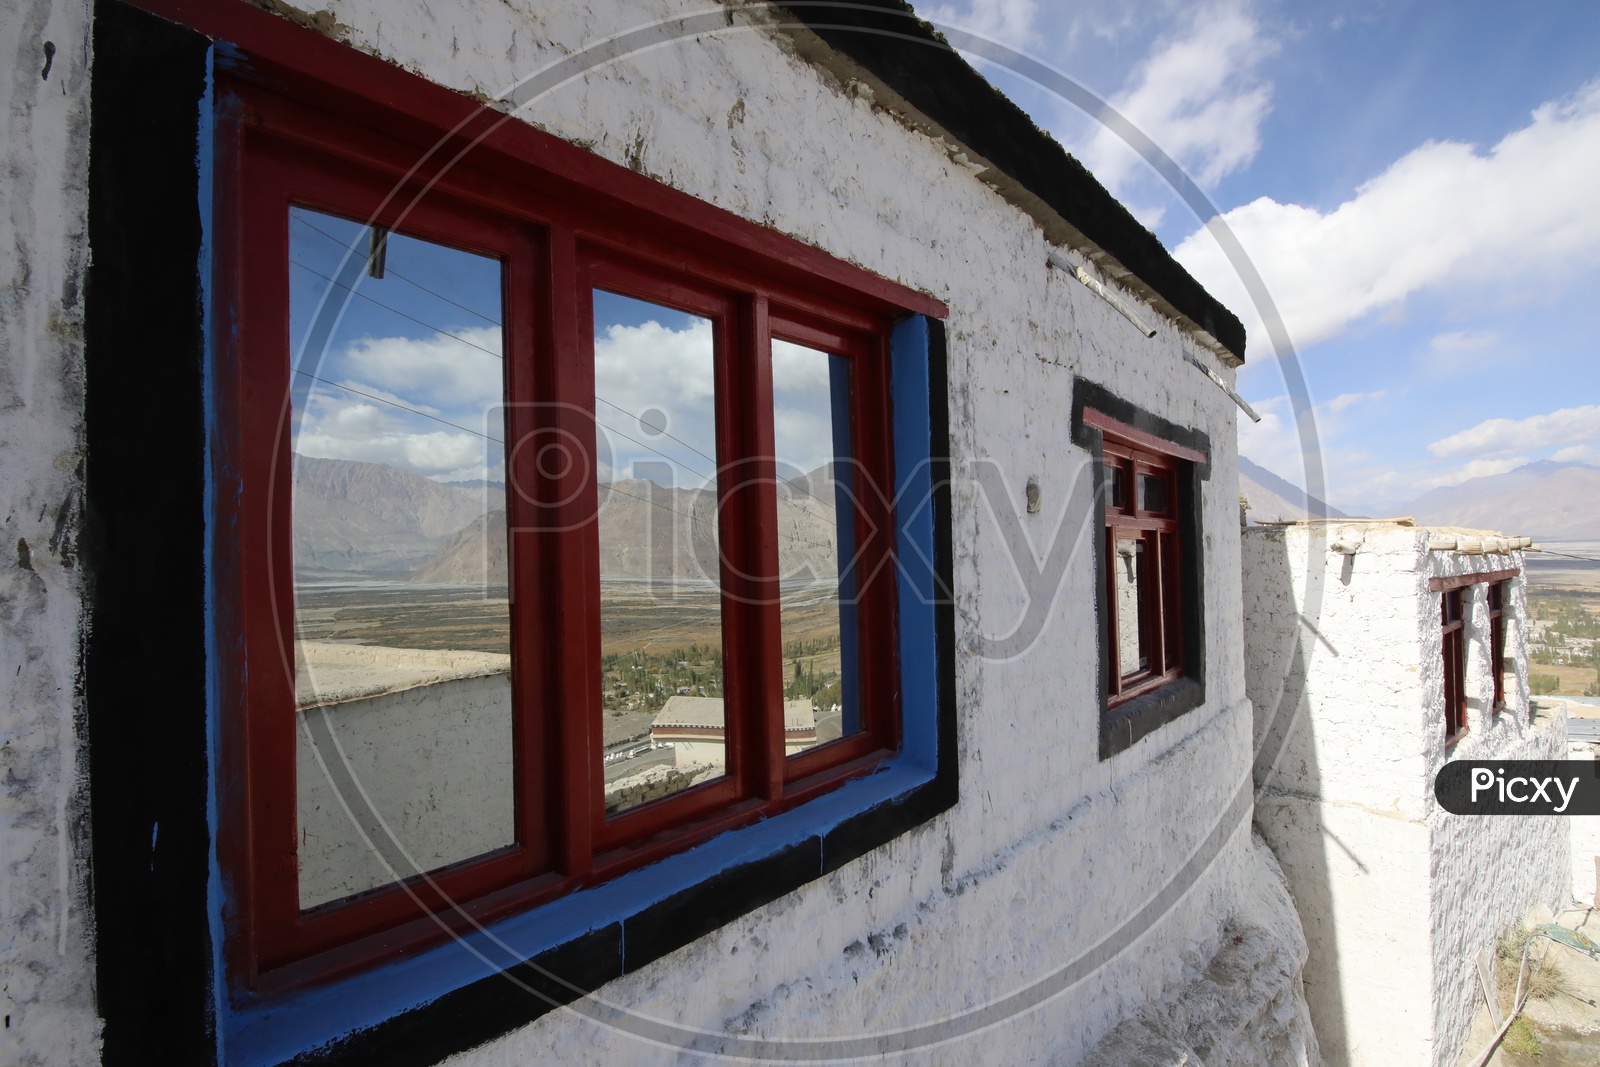 Inside Views Of Buddhist Temples In Leh